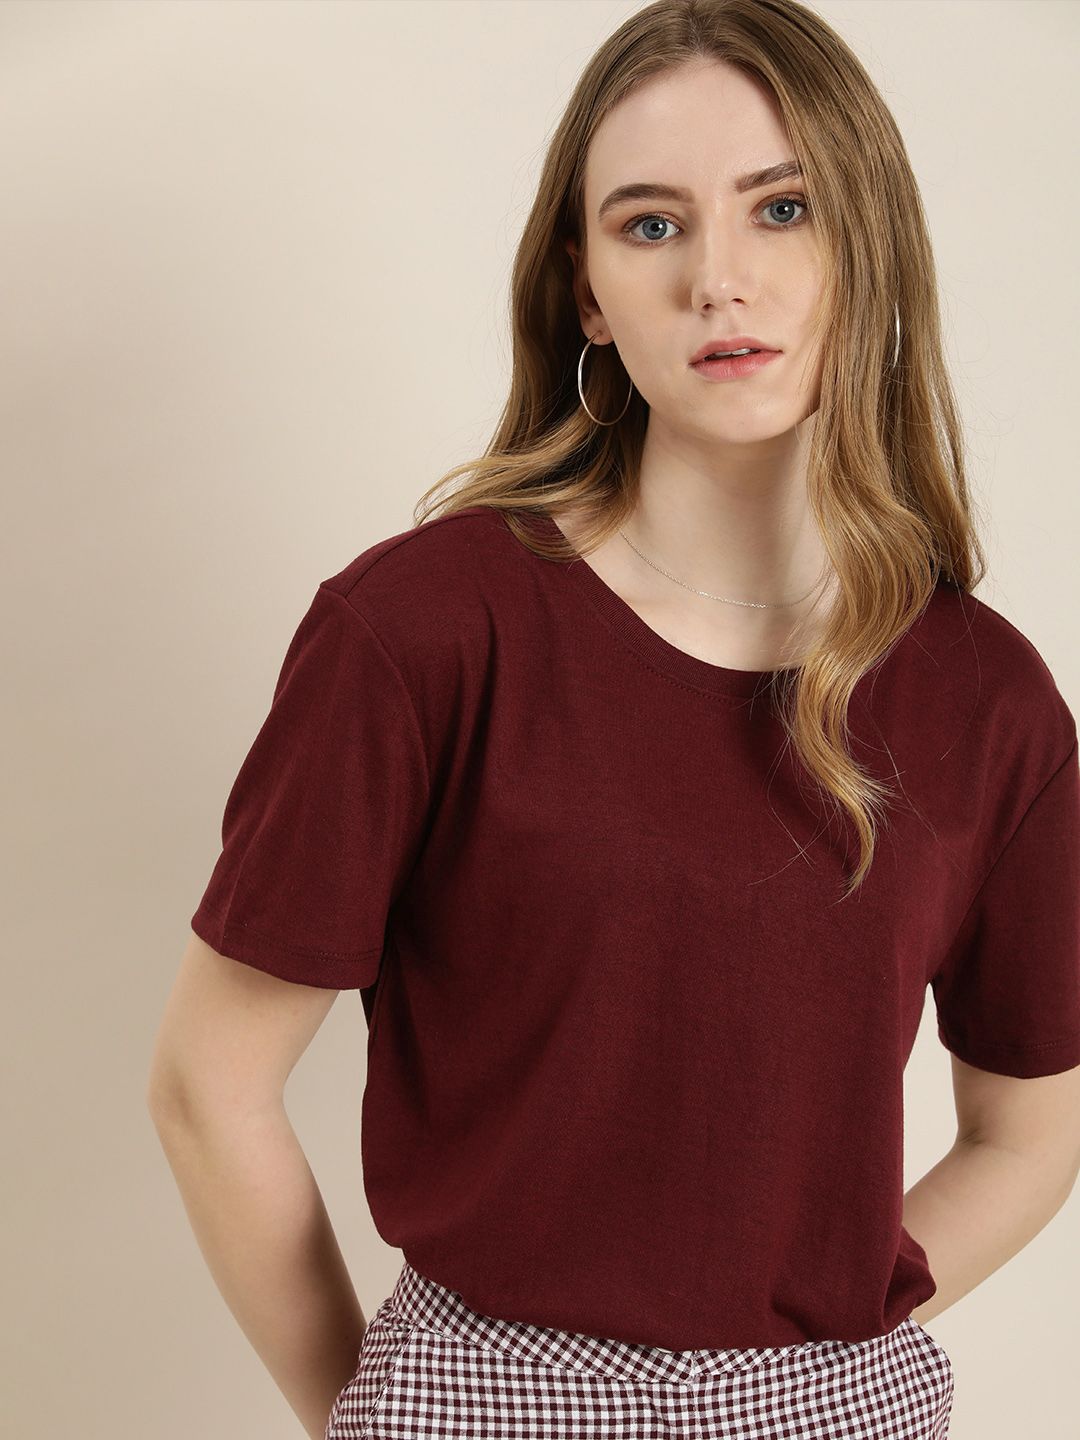 encore by INVICTUS Solid Round Neck Top Price in India